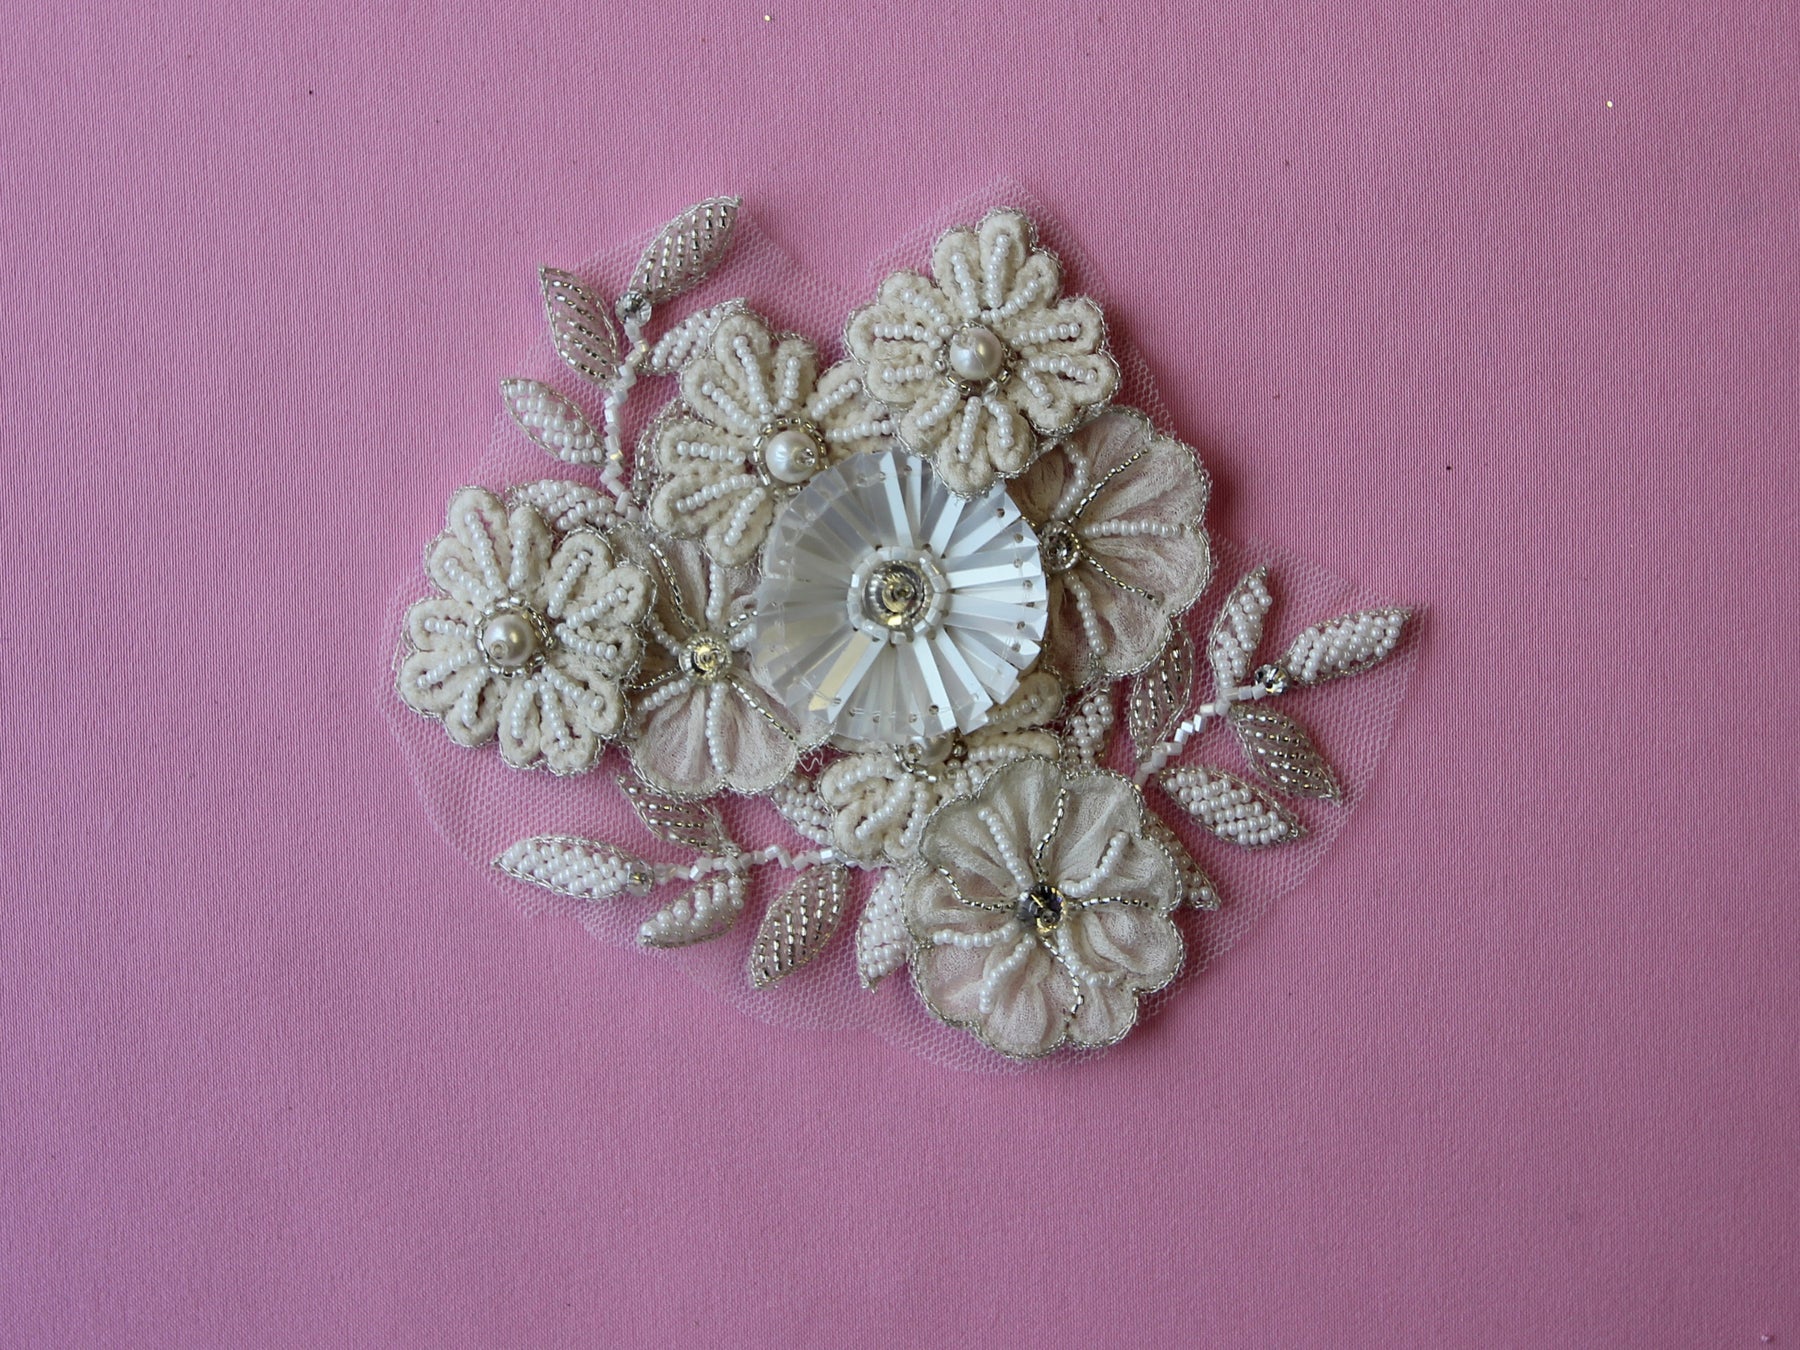 Crystal Embroidery - Aster